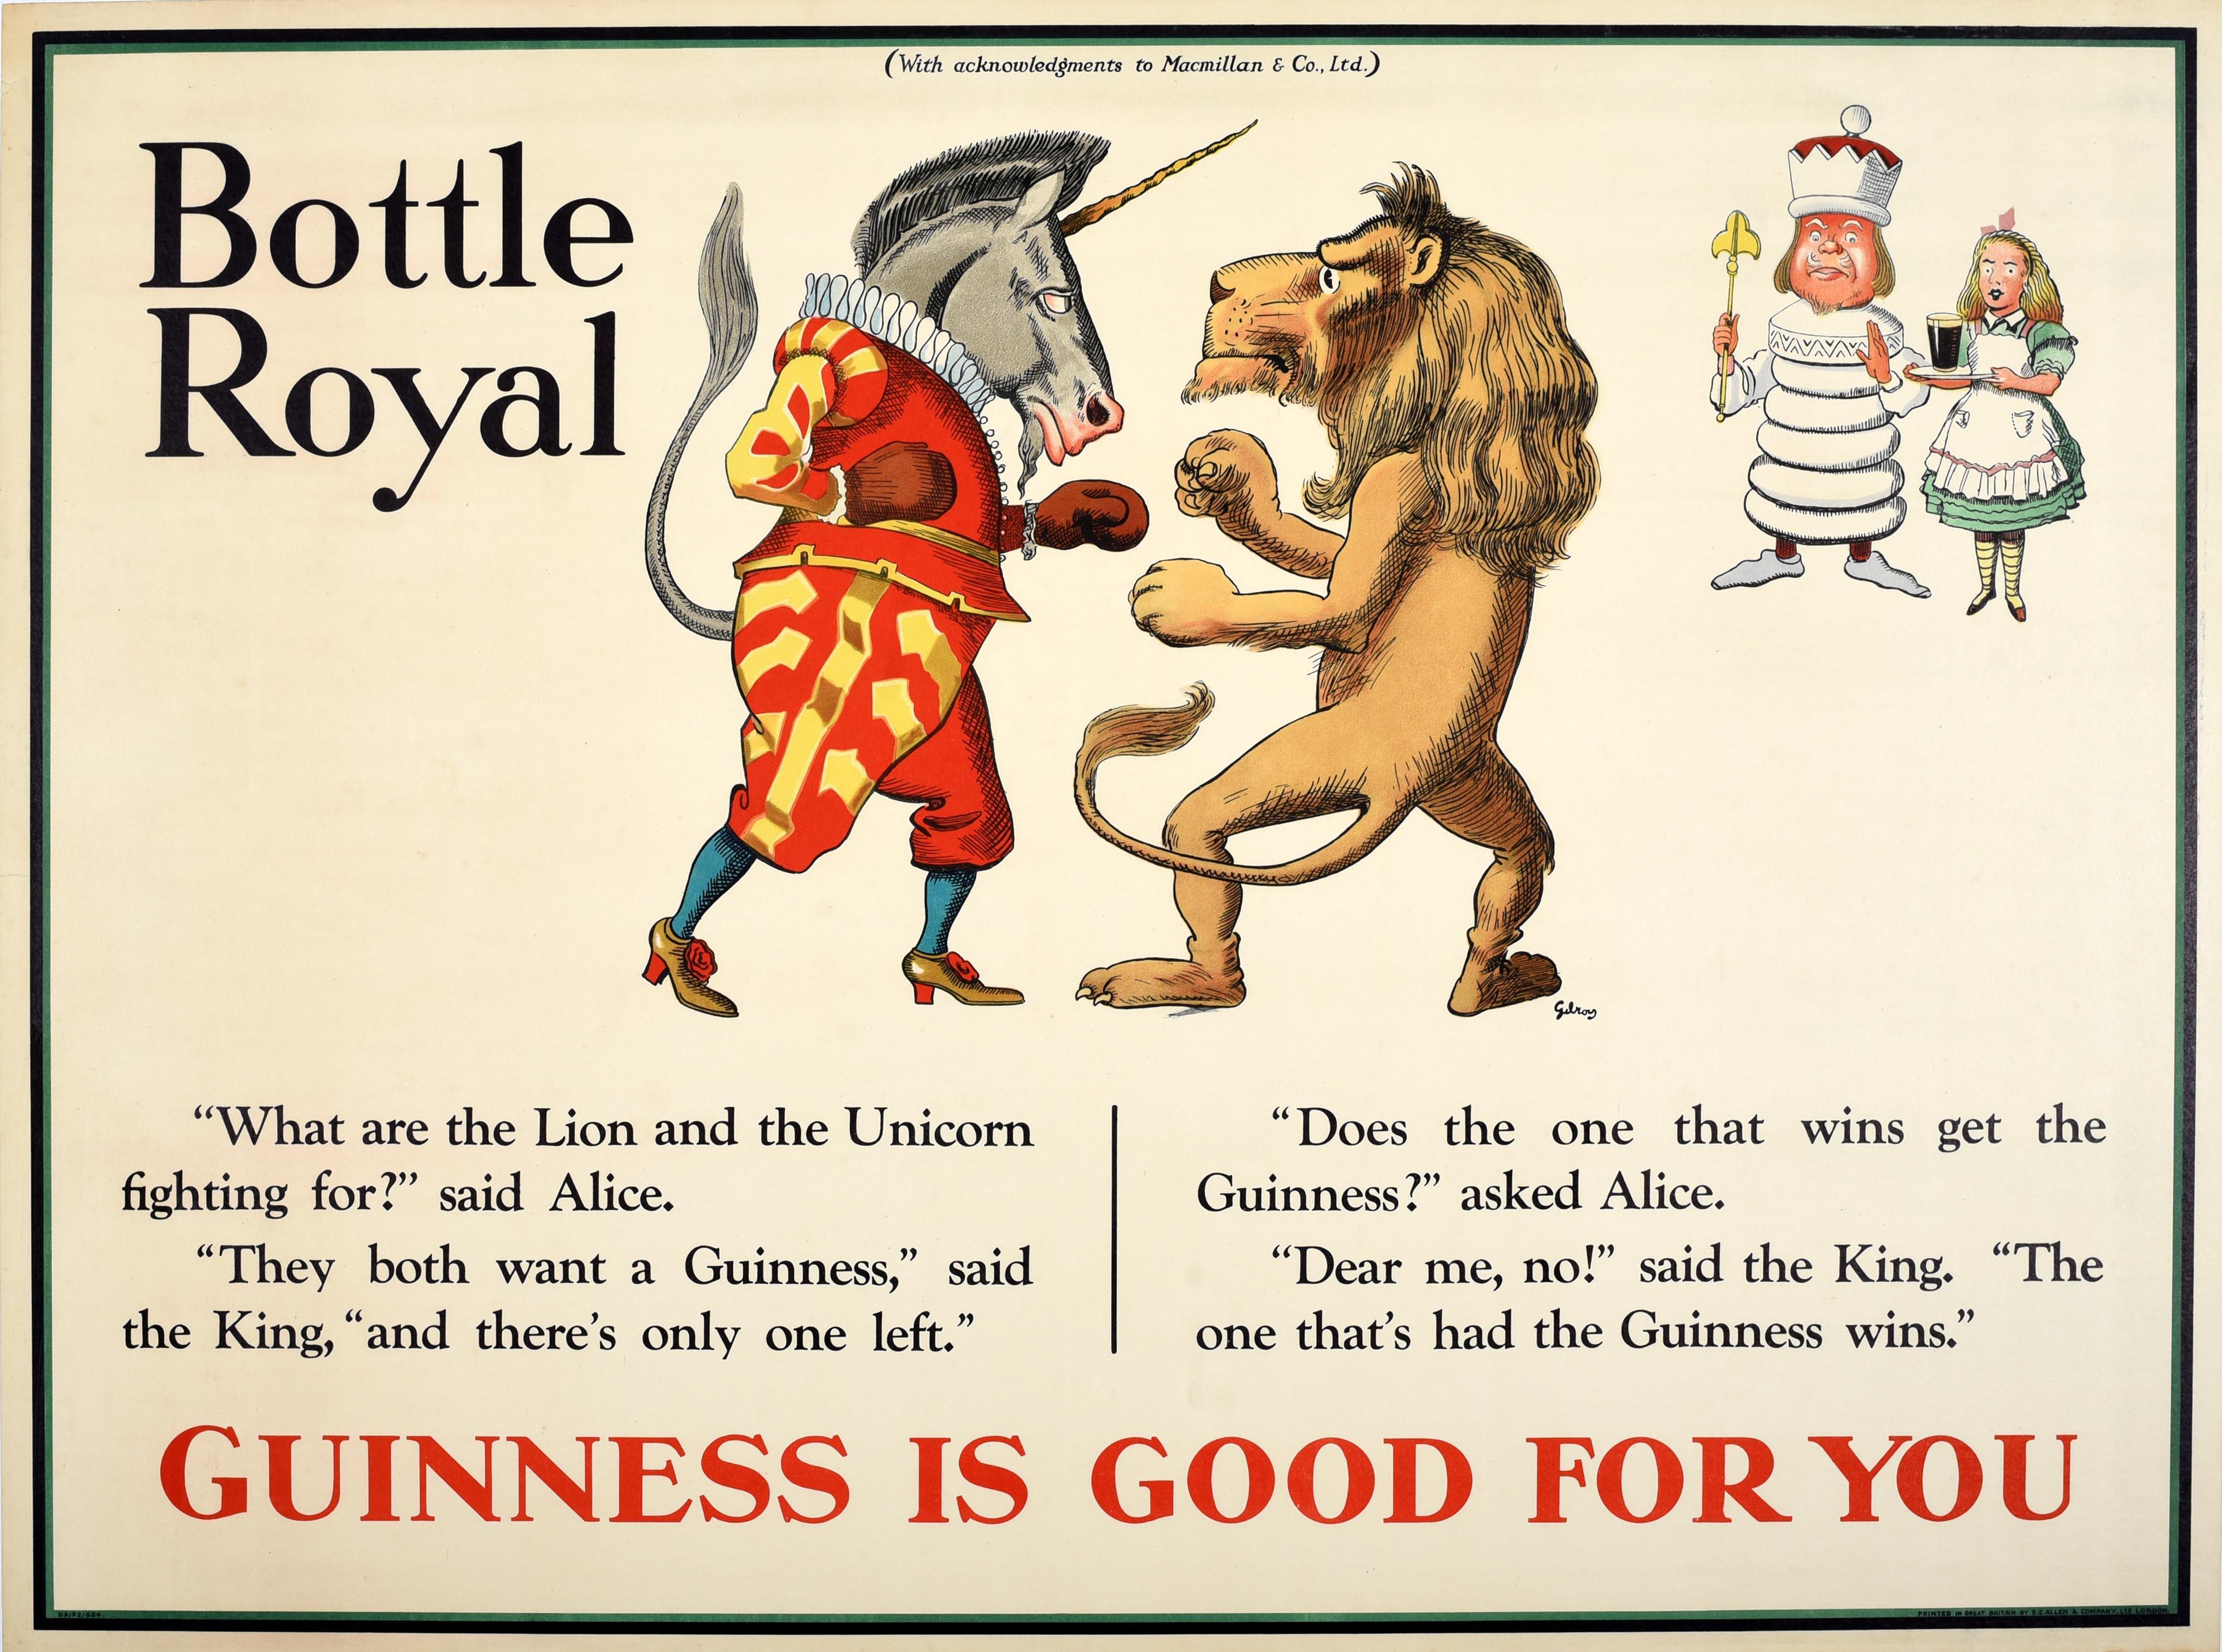 Rare original vintage Guinness advertising poster - Bottle Royal Guinness Is Good For You - featuring a fun Alice in Wonderland themed illustration by the notable artist John Gilroy (John Thomas Young Gilroy; 1898-1985) depicting a unicorn and lion